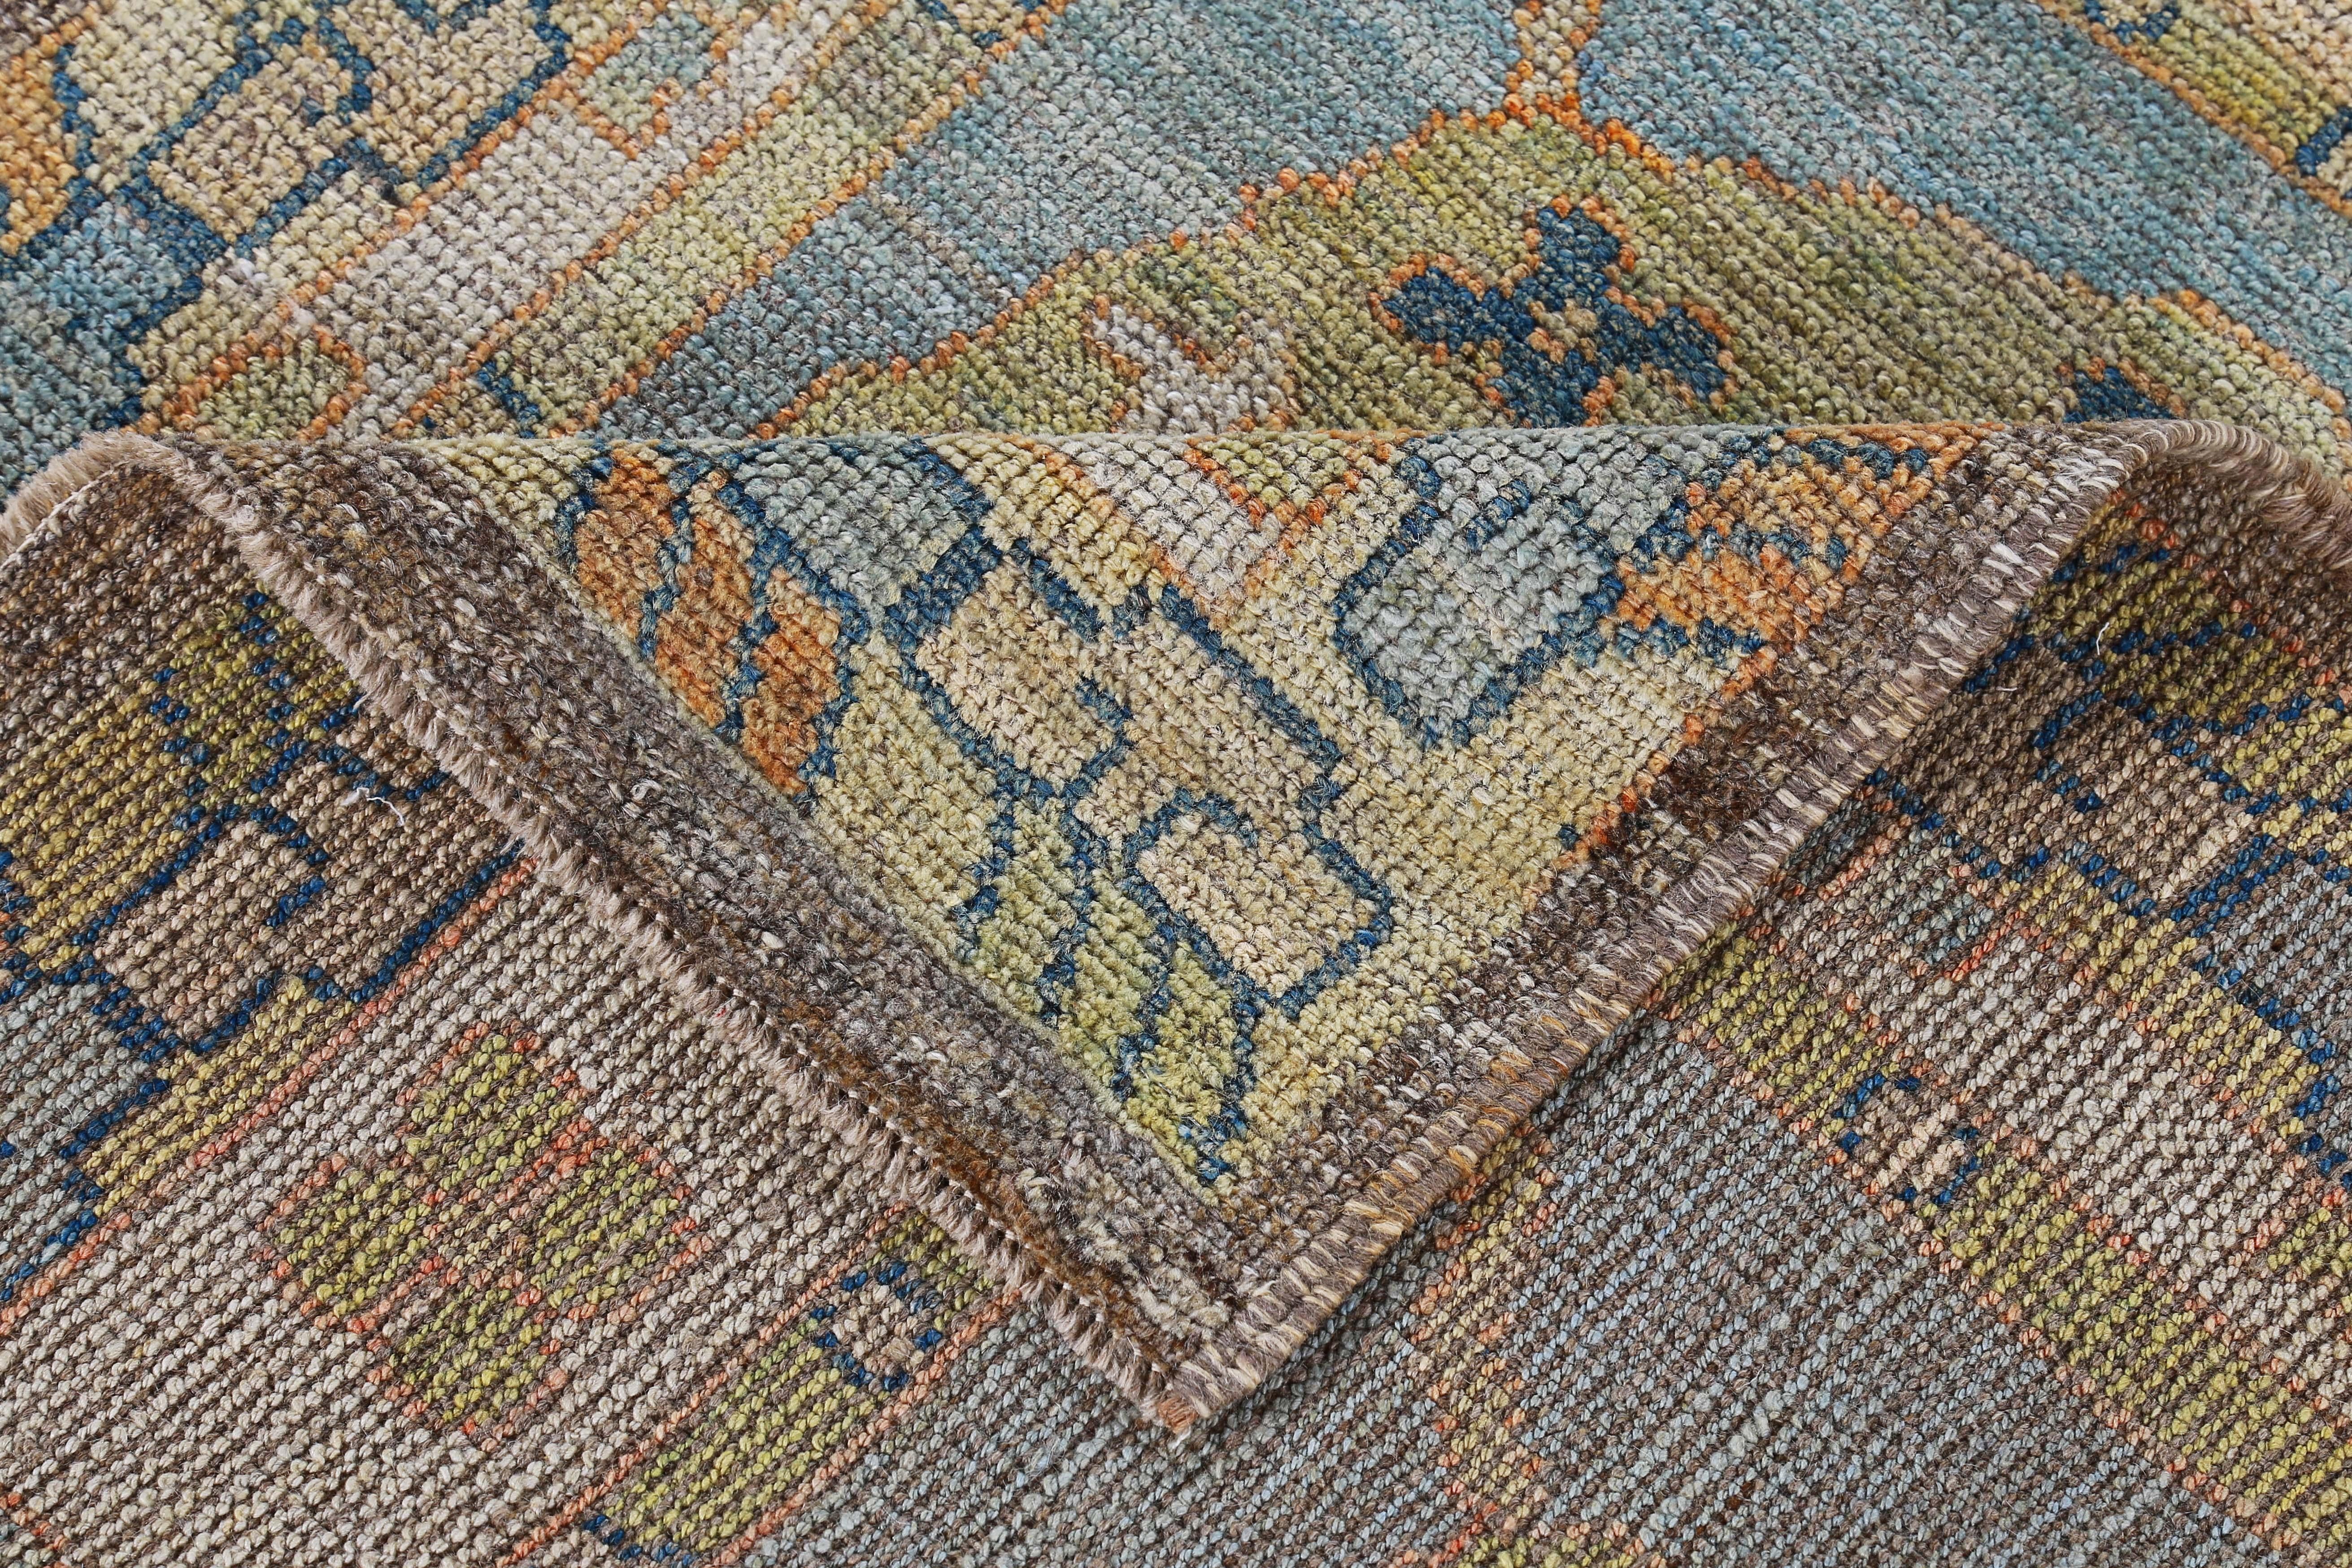 Contemporary Turkish Oushak Runner Rug with Blue and Orange Floral Patterns on Beige Field